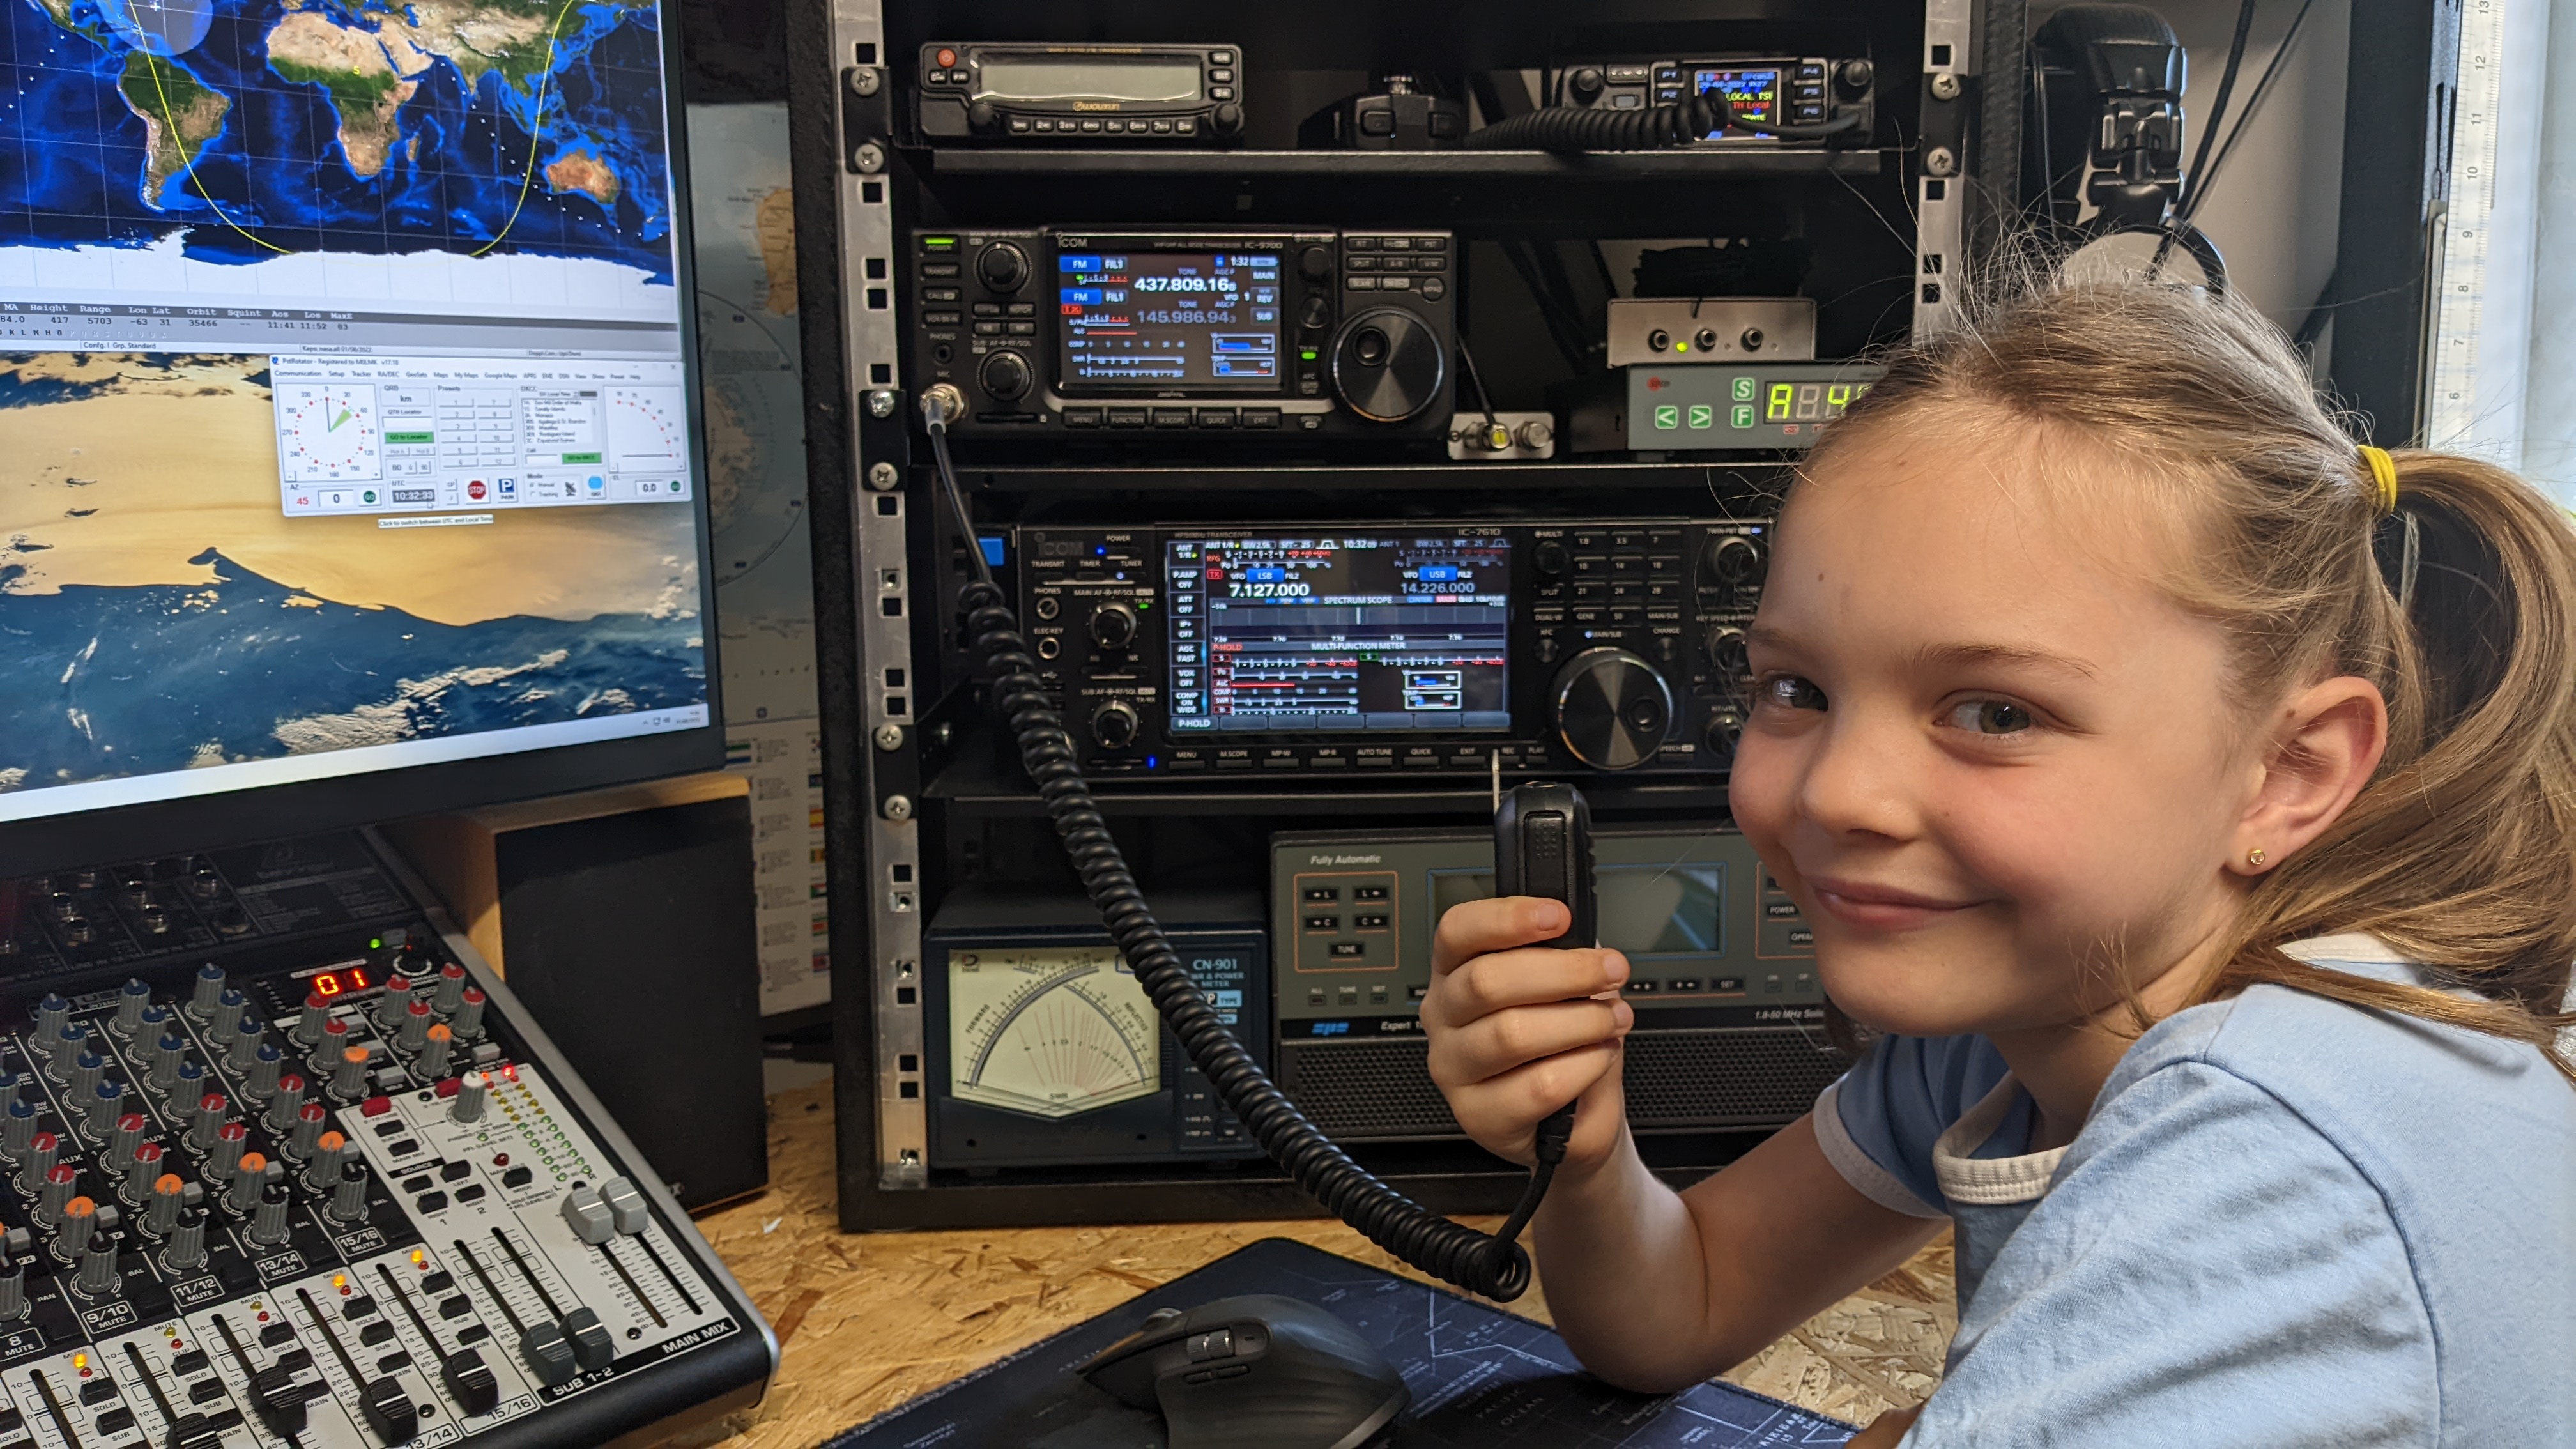 Eight-year-old makes contact with astronaut in space via dad's amateur radio  | ITV News